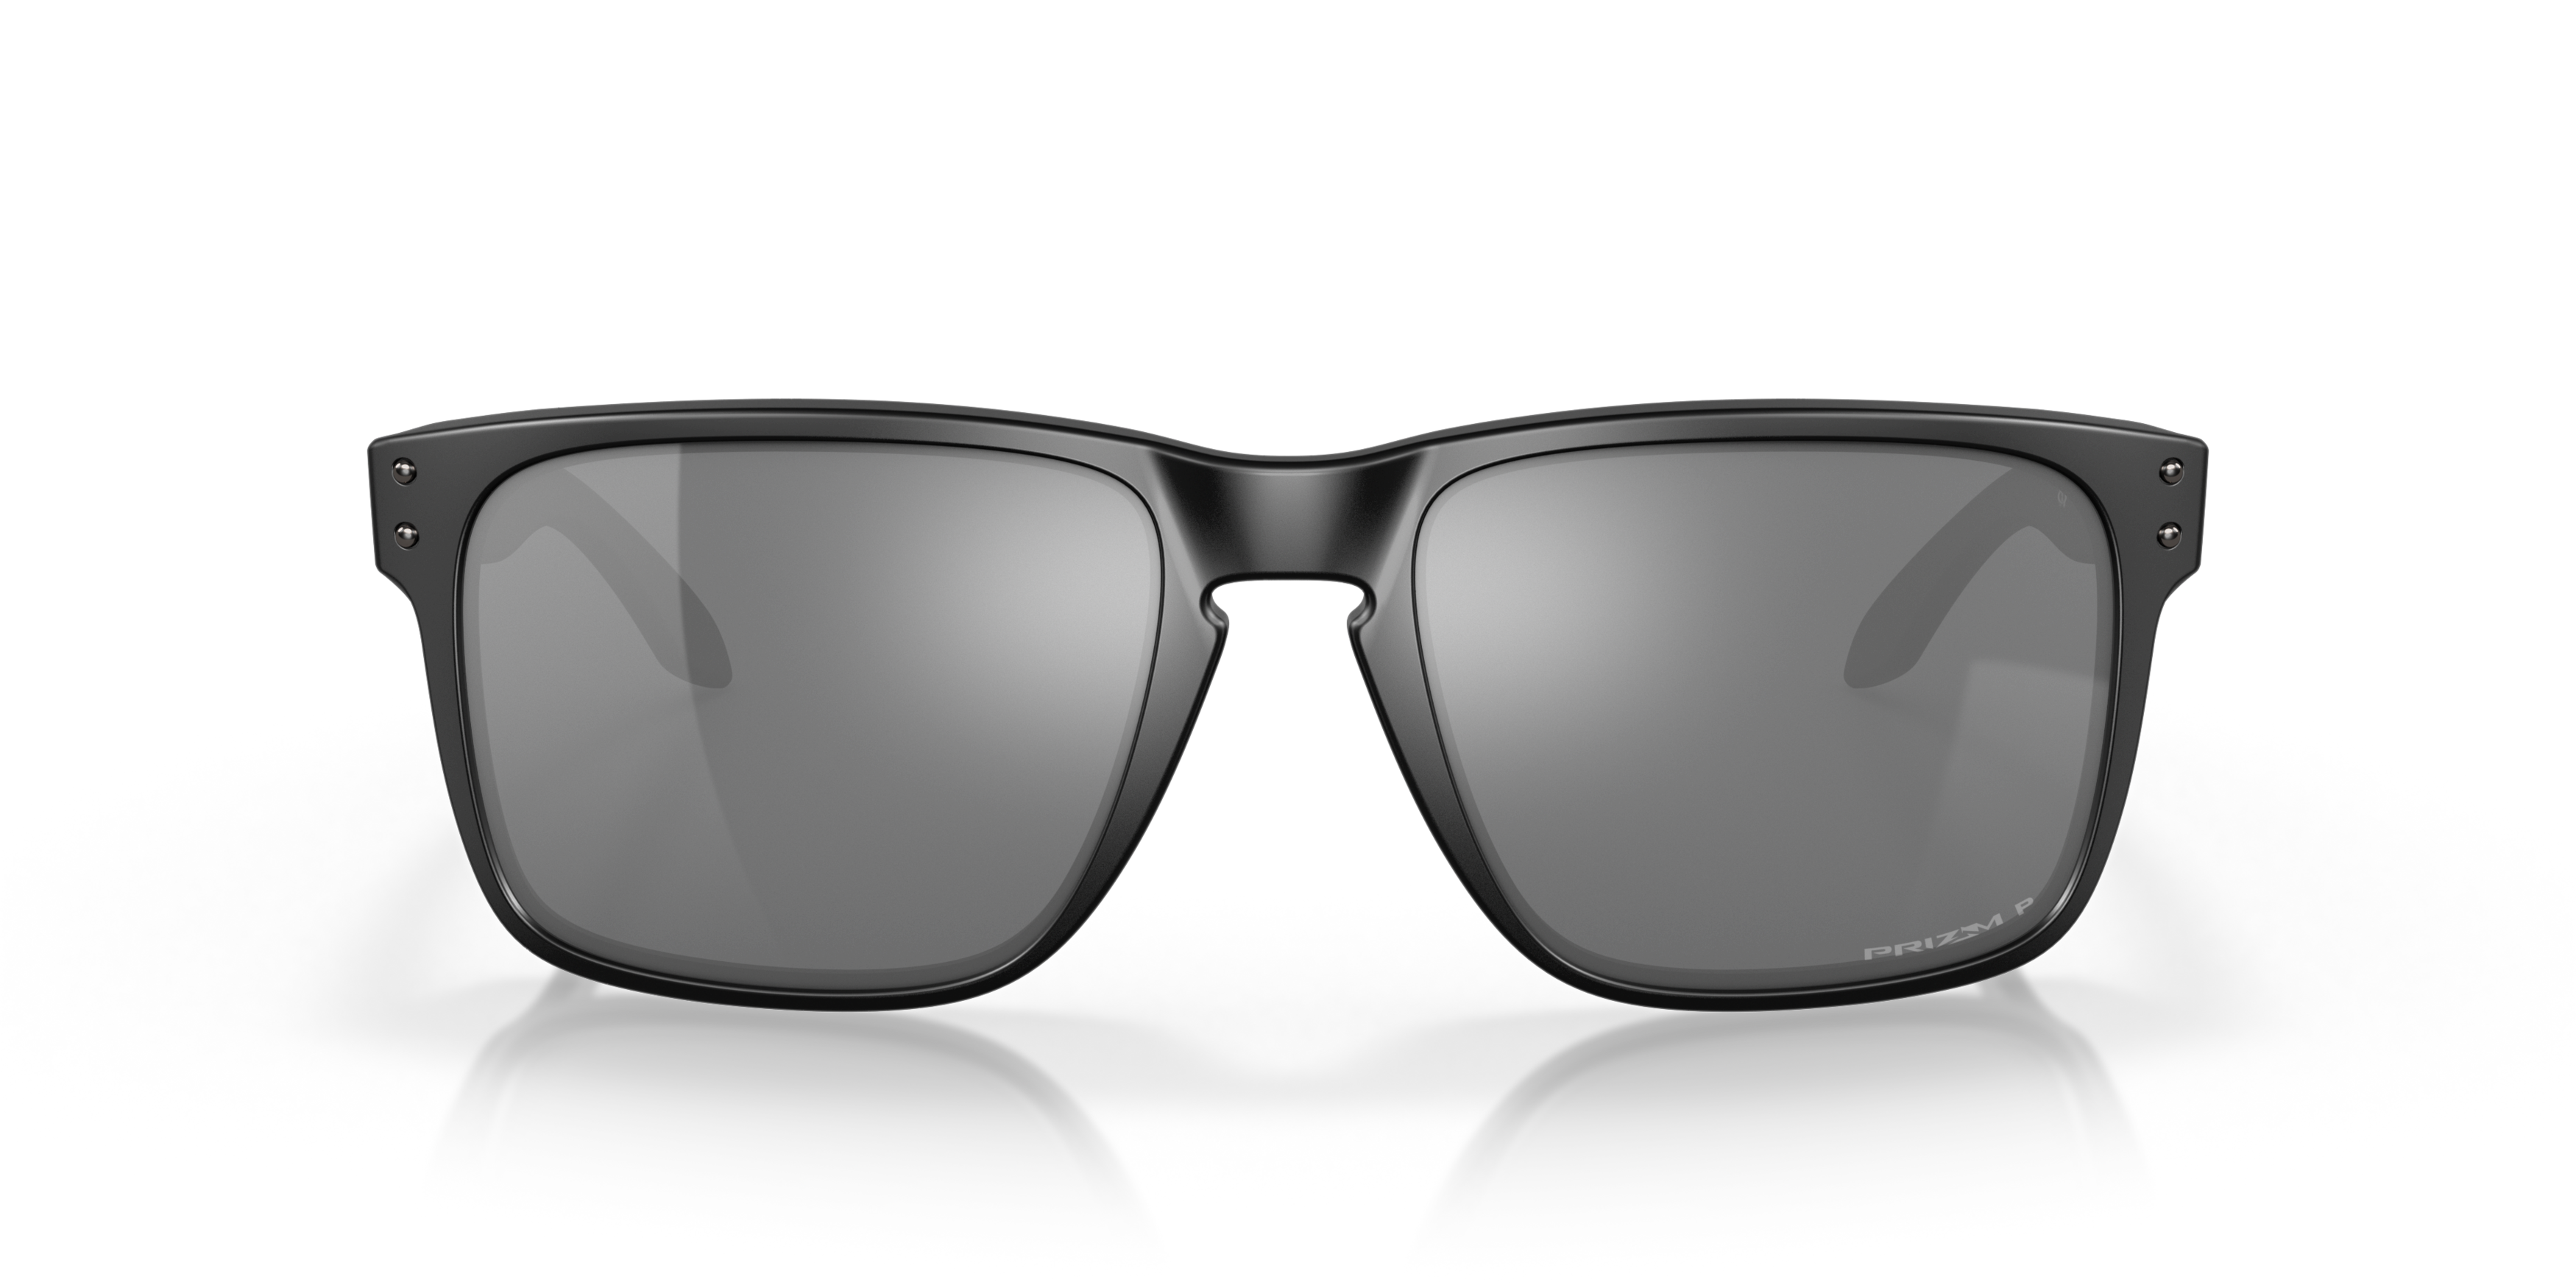 [products.image.front] OAKLEY OO9417 941705